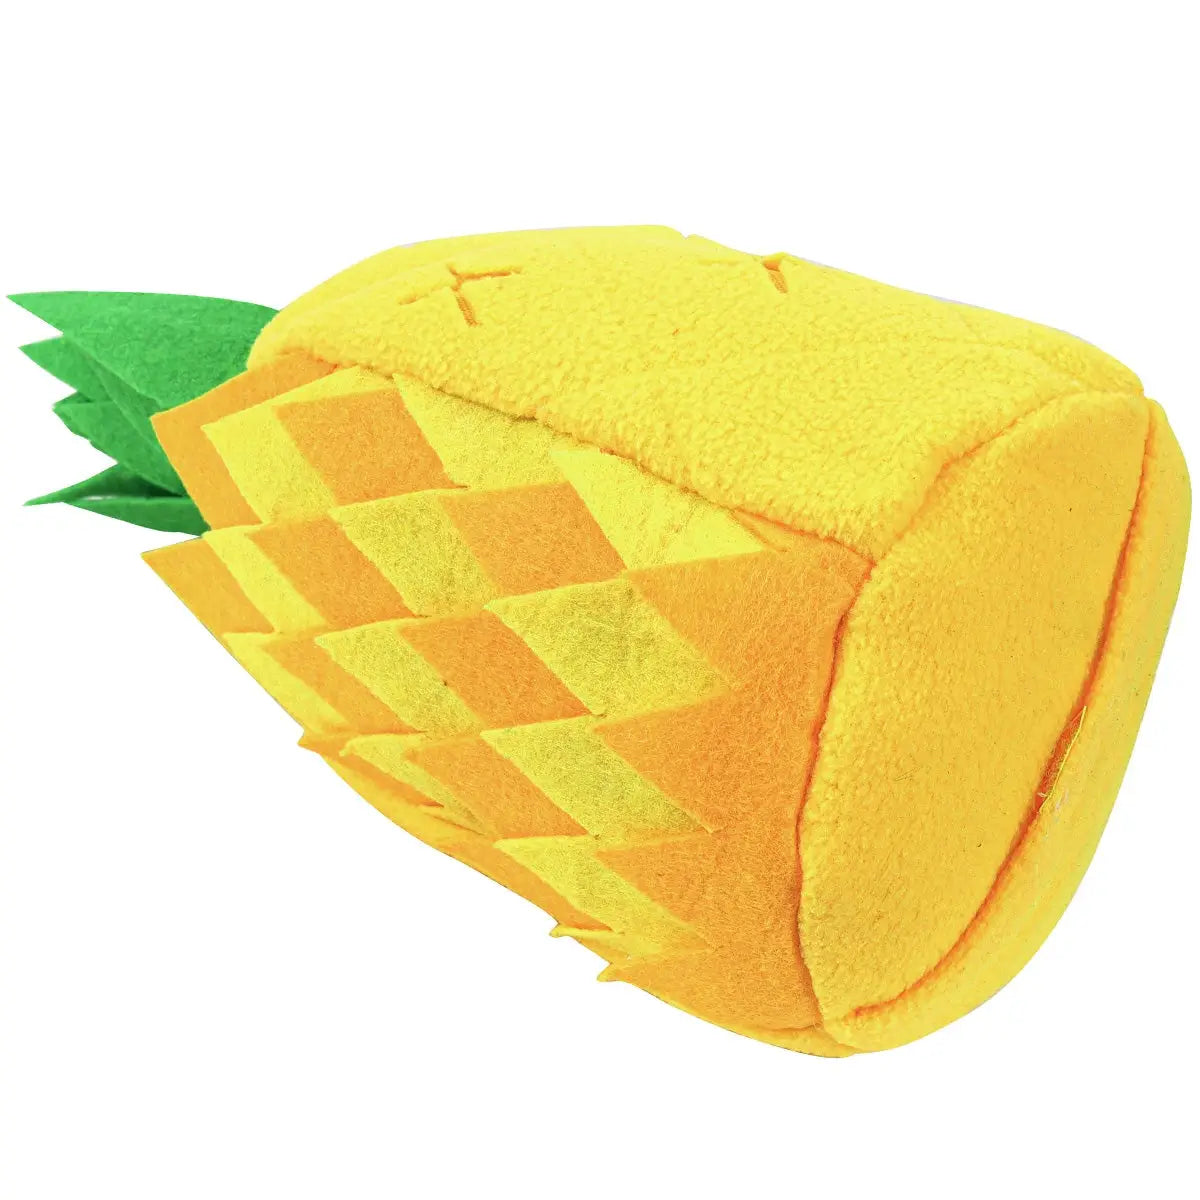 Pineapple Snuffle Toy